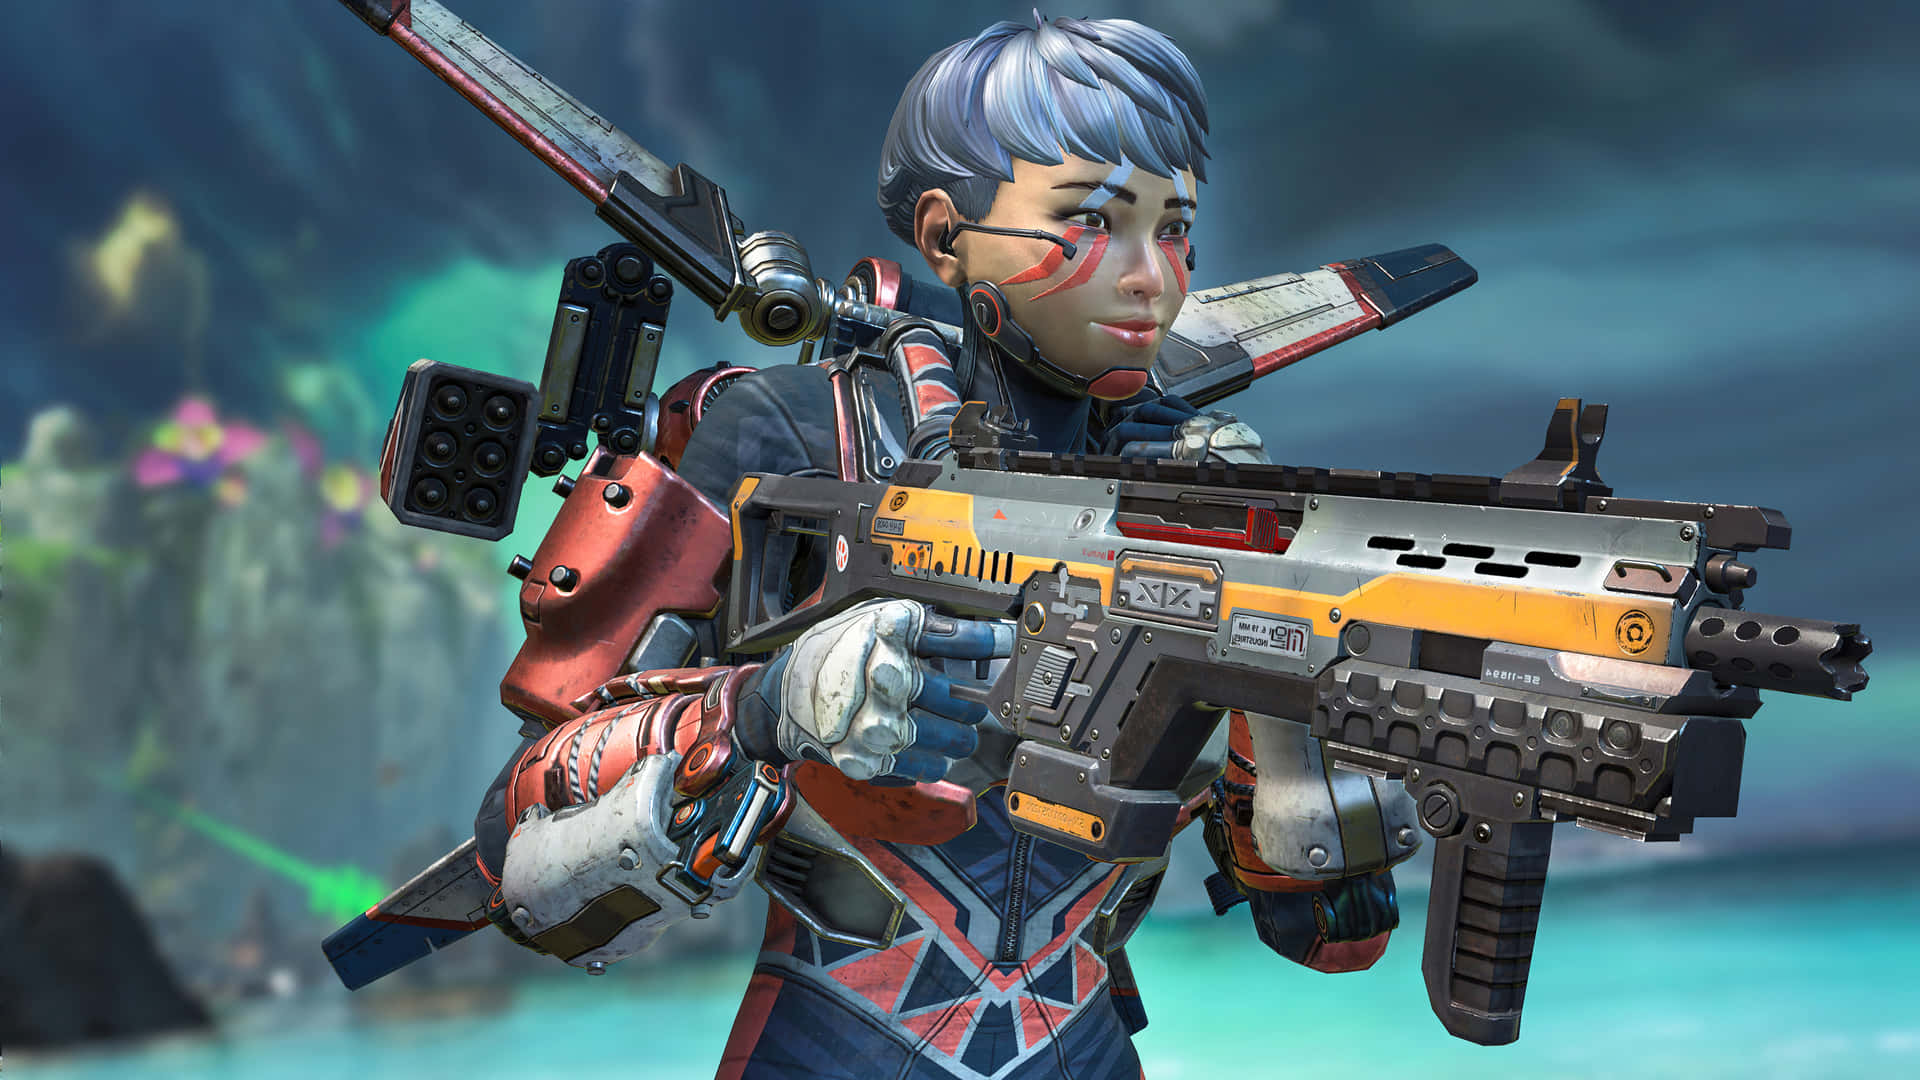 Valkyrie Apex Legends With New SMG Weapon Wallpaper